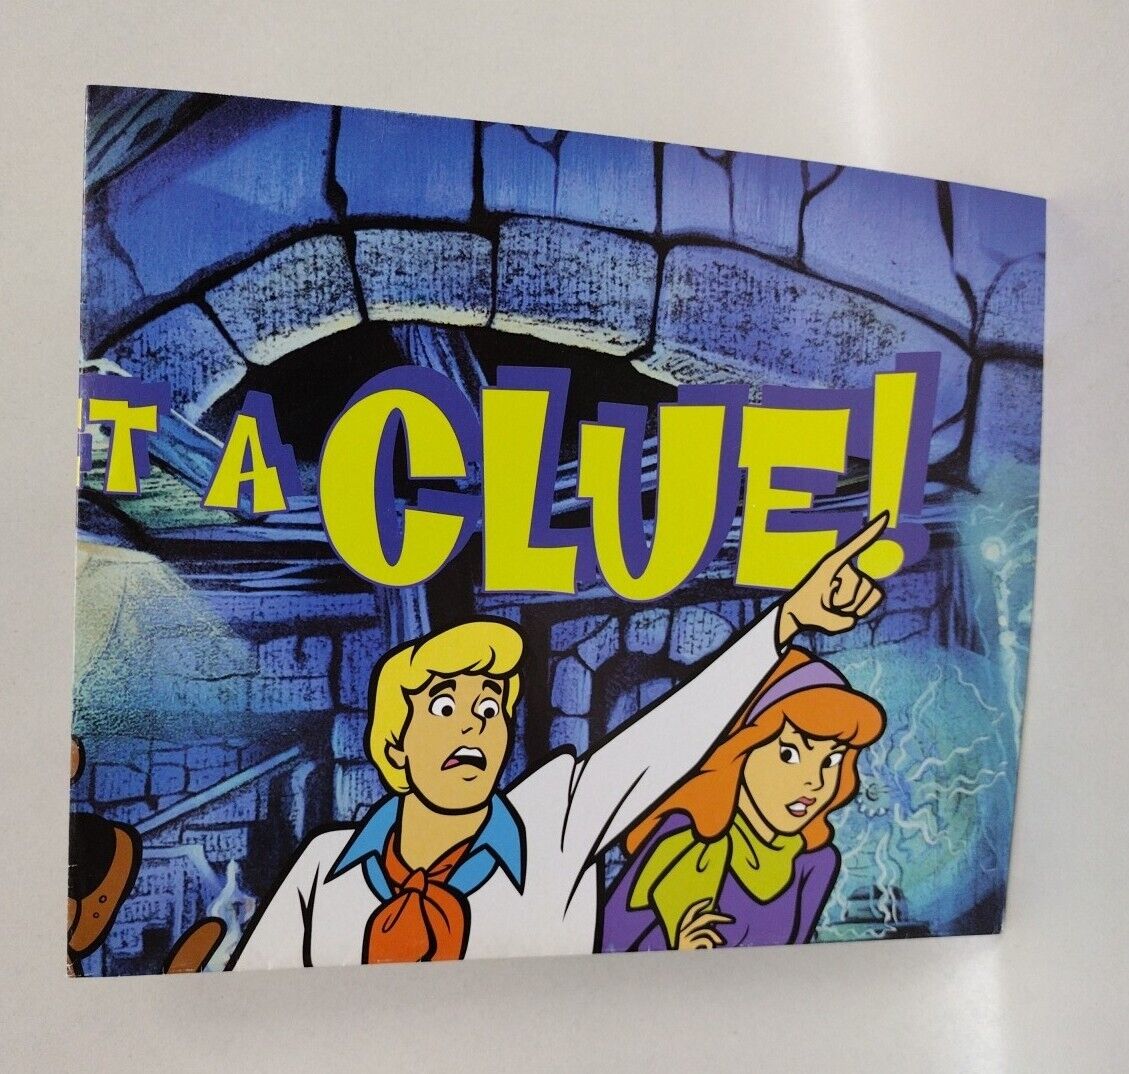 Scooby-Doo (2000) At a Glance S11776 Hanna-Barbera Poster 16x20” Folded